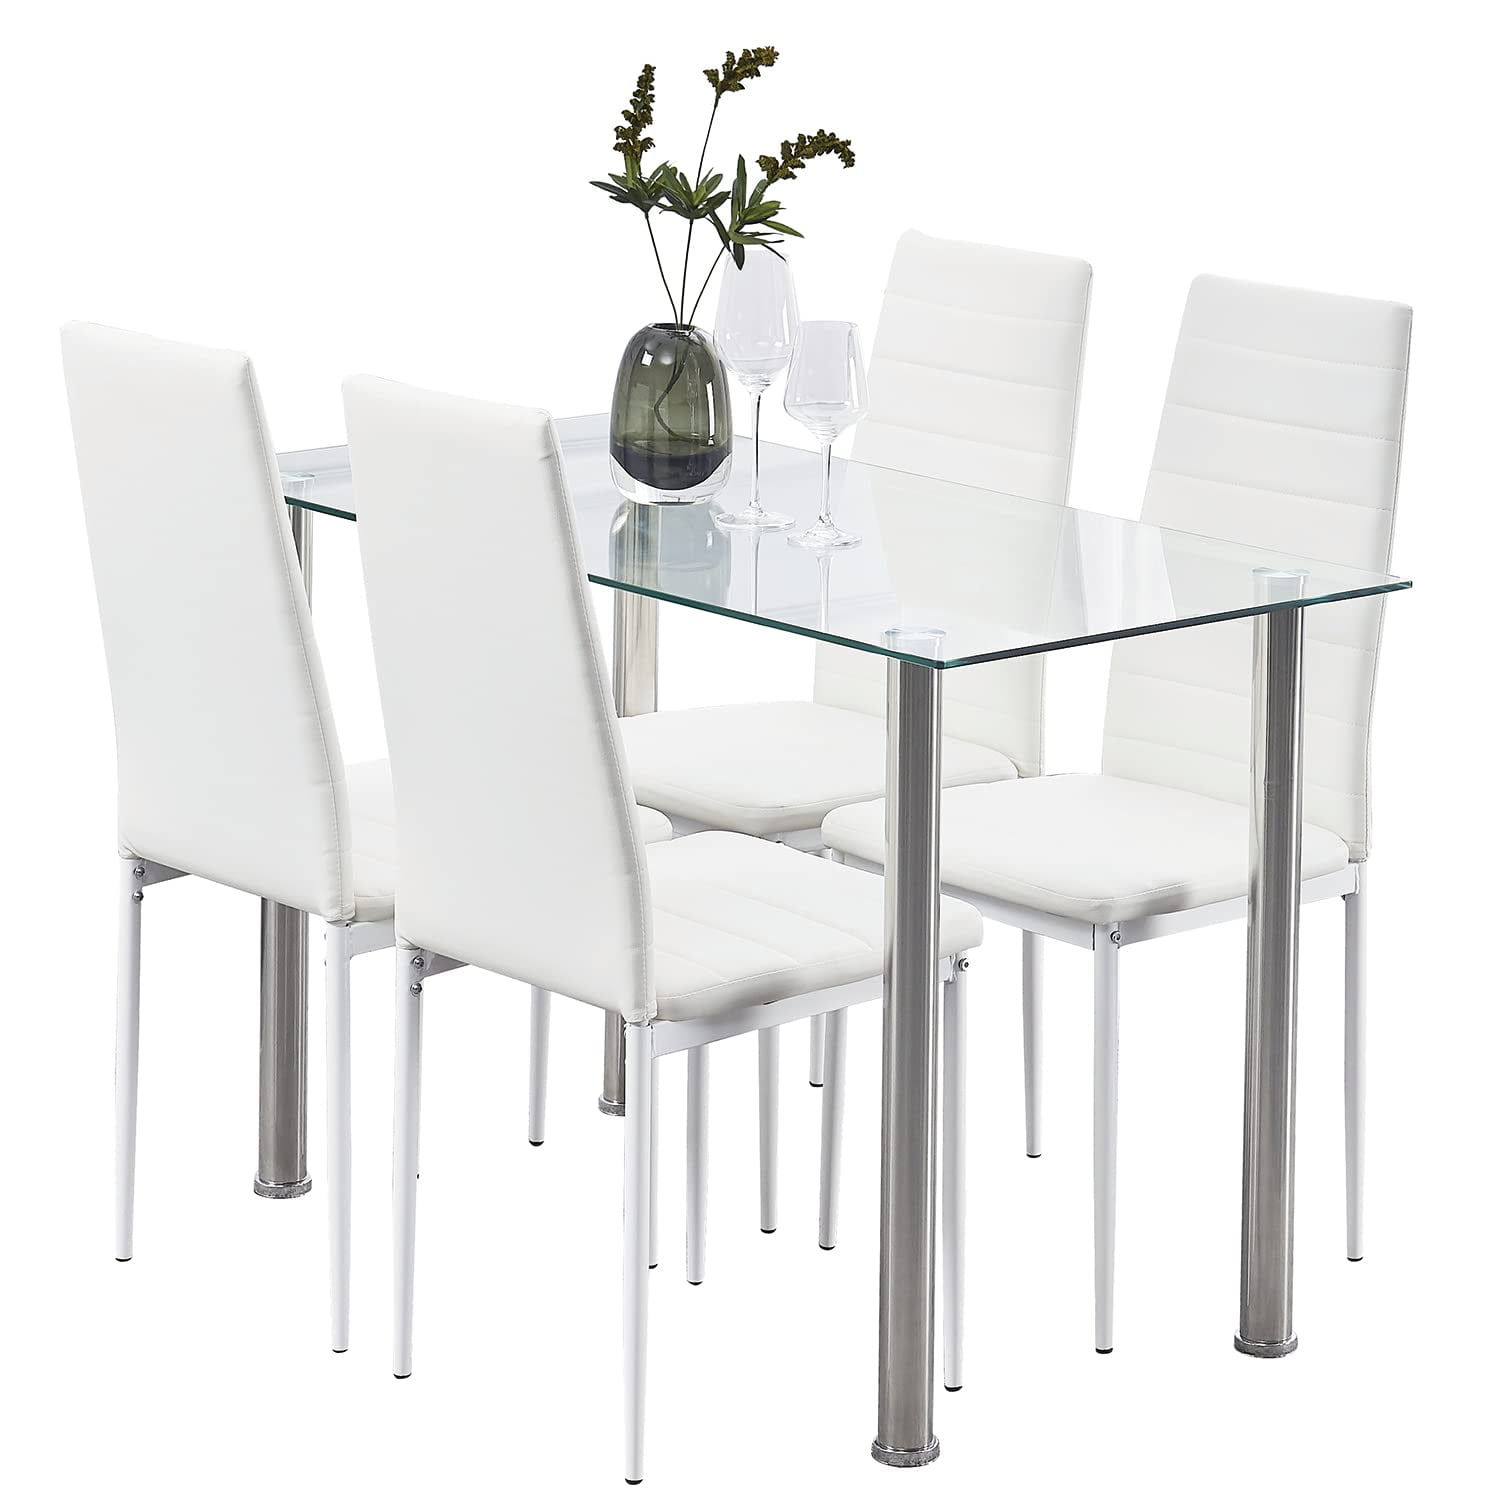 Dining Table Set for 4, ROZHOME 5 Piece Kitchen Table and Chairs with Clear Tempered Glass Table Top and 4 White PU Leather Metal Frame Chairs